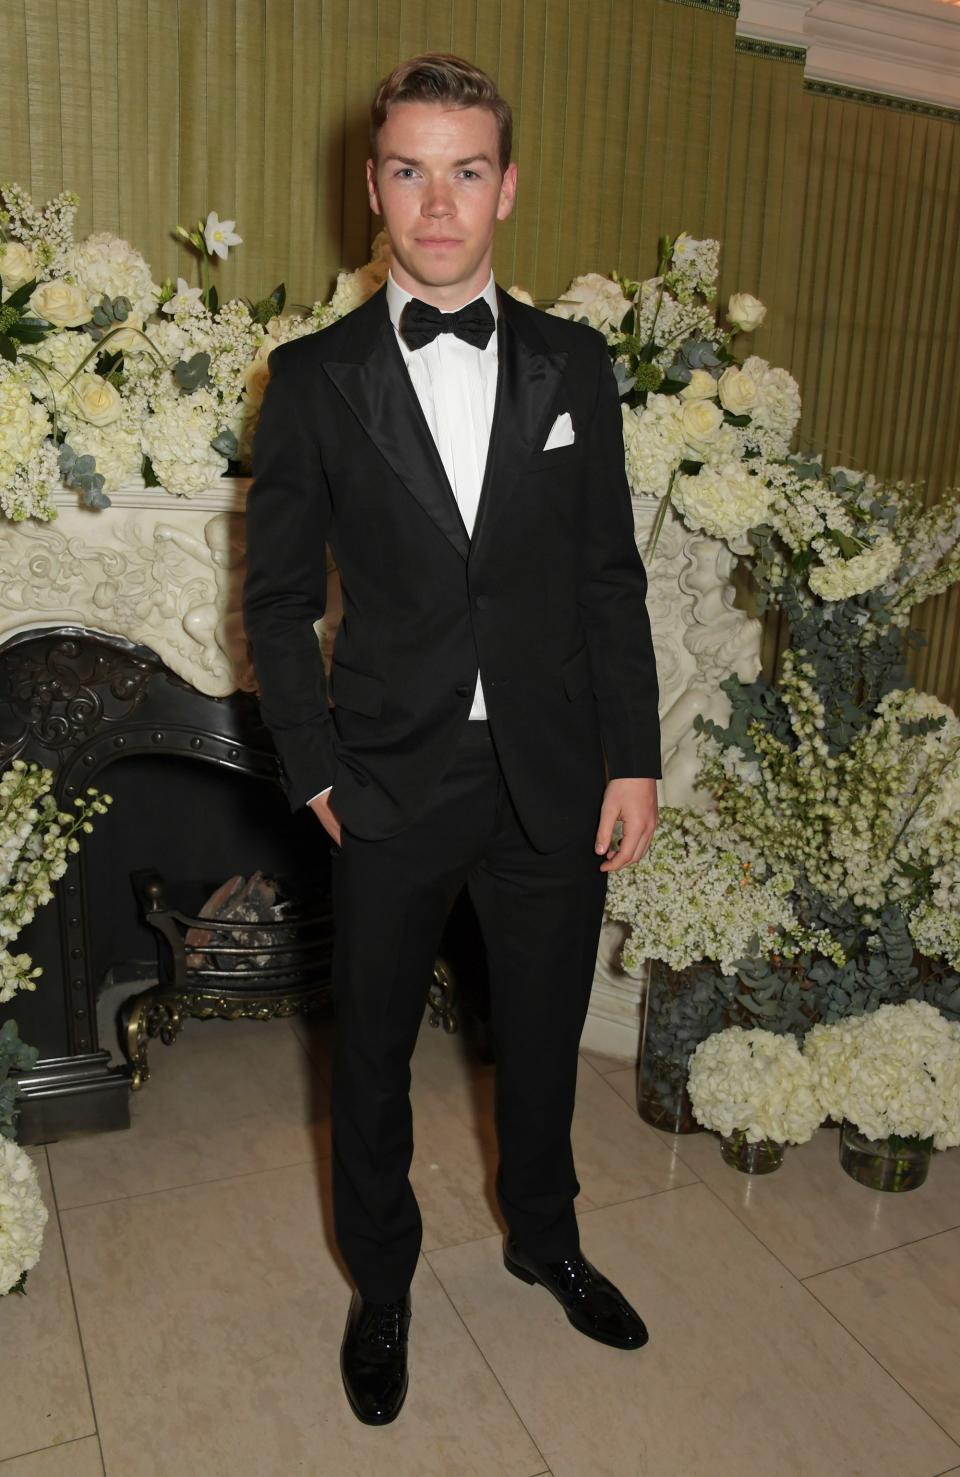 Will Poulter attends the British Vogue and Tiffany & Co. Celebrate Fashion and Film Party at Annabel’s